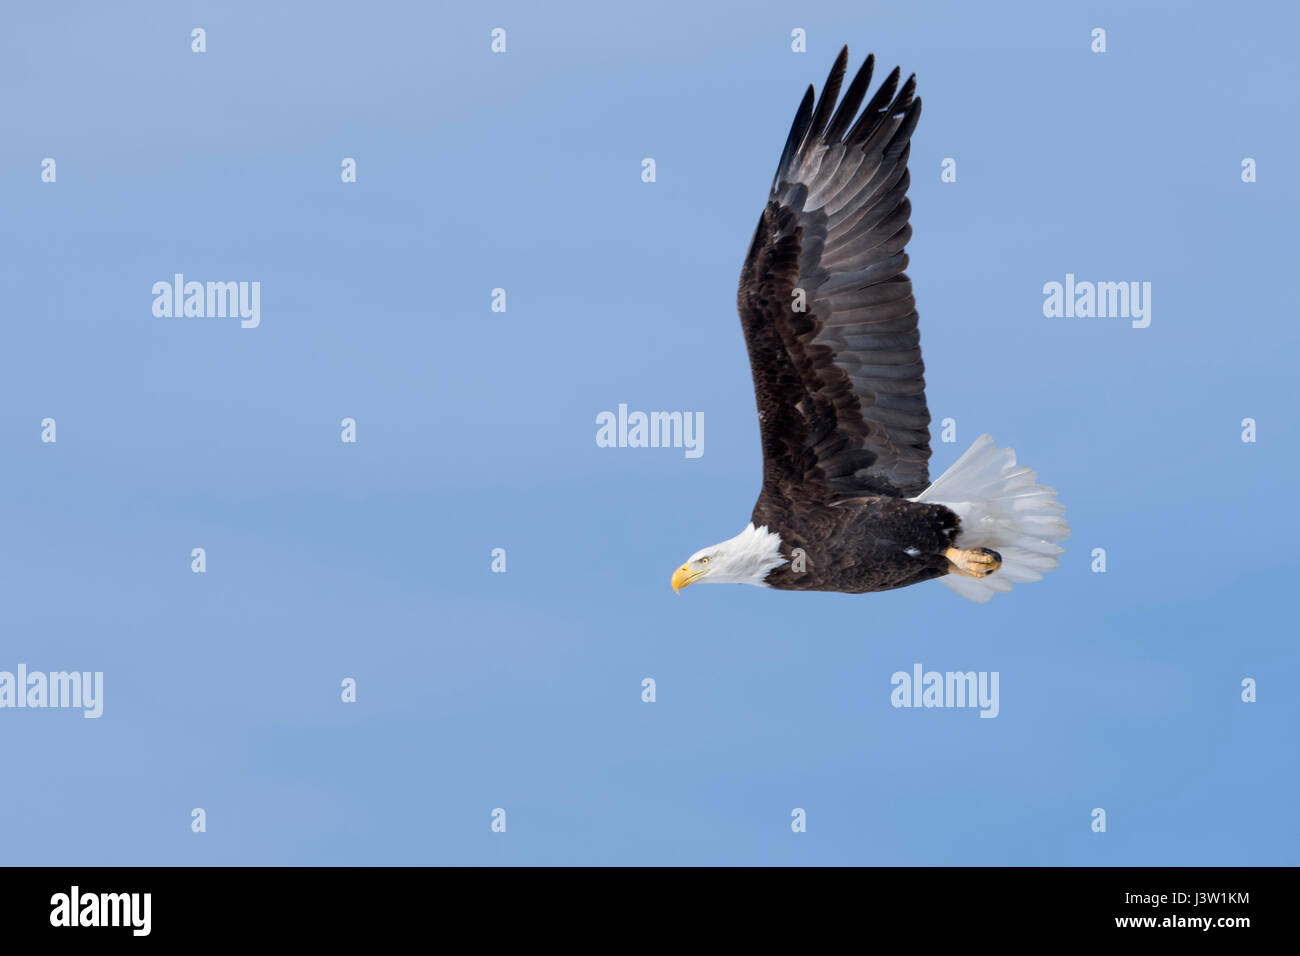 Bald Eagle ( Haliaeetus leucocephalus ), in flight, against blue sky, stretched wings, detailed side view, Yellowstone area, Montana, USA. Stock Photo